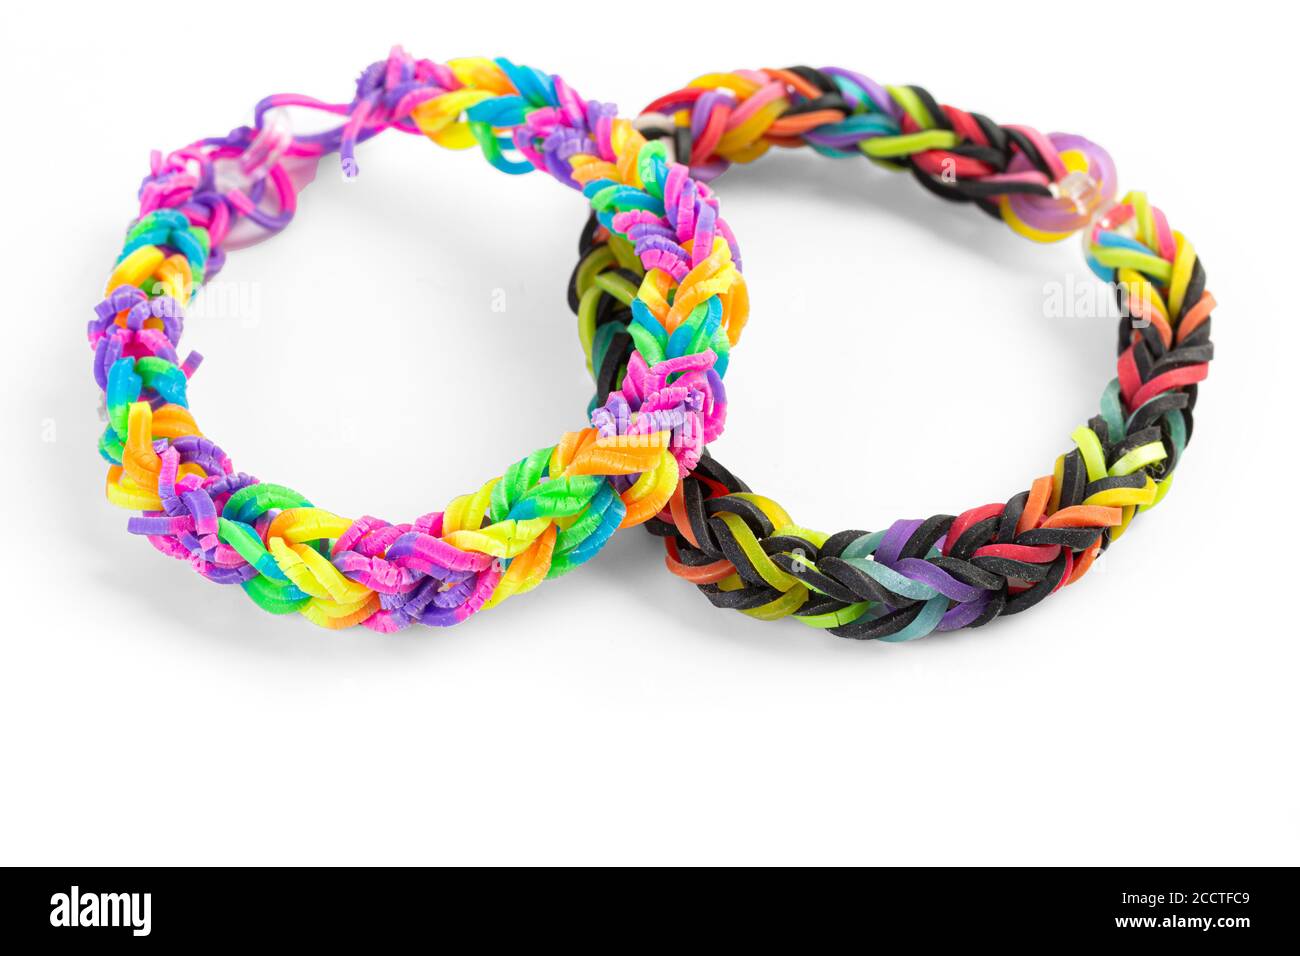 A pair of bracelets made with small rubber bands on white. Stock Photo